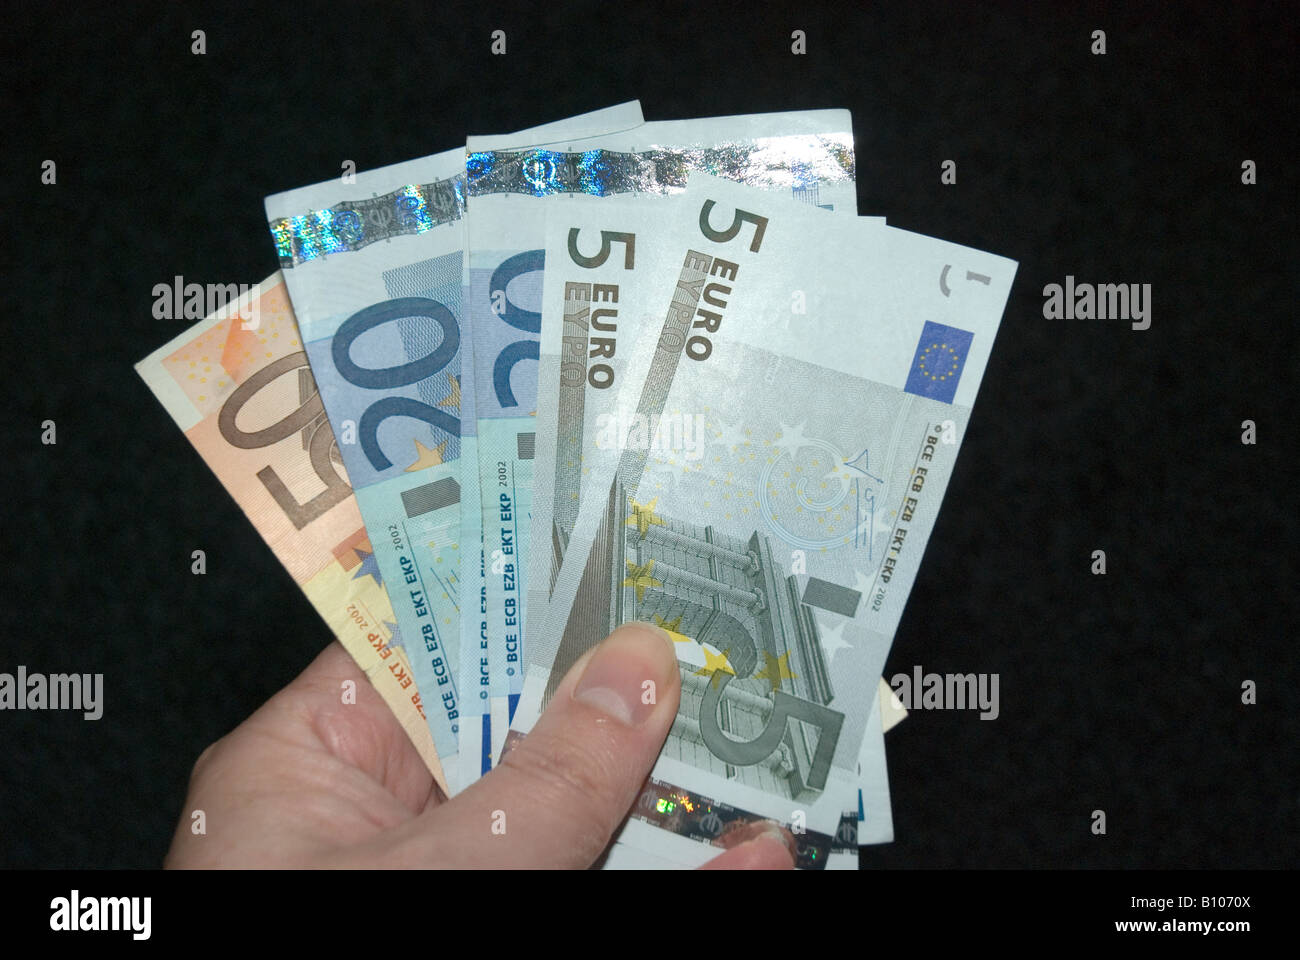 Euro notes held in a hand Stock Photo